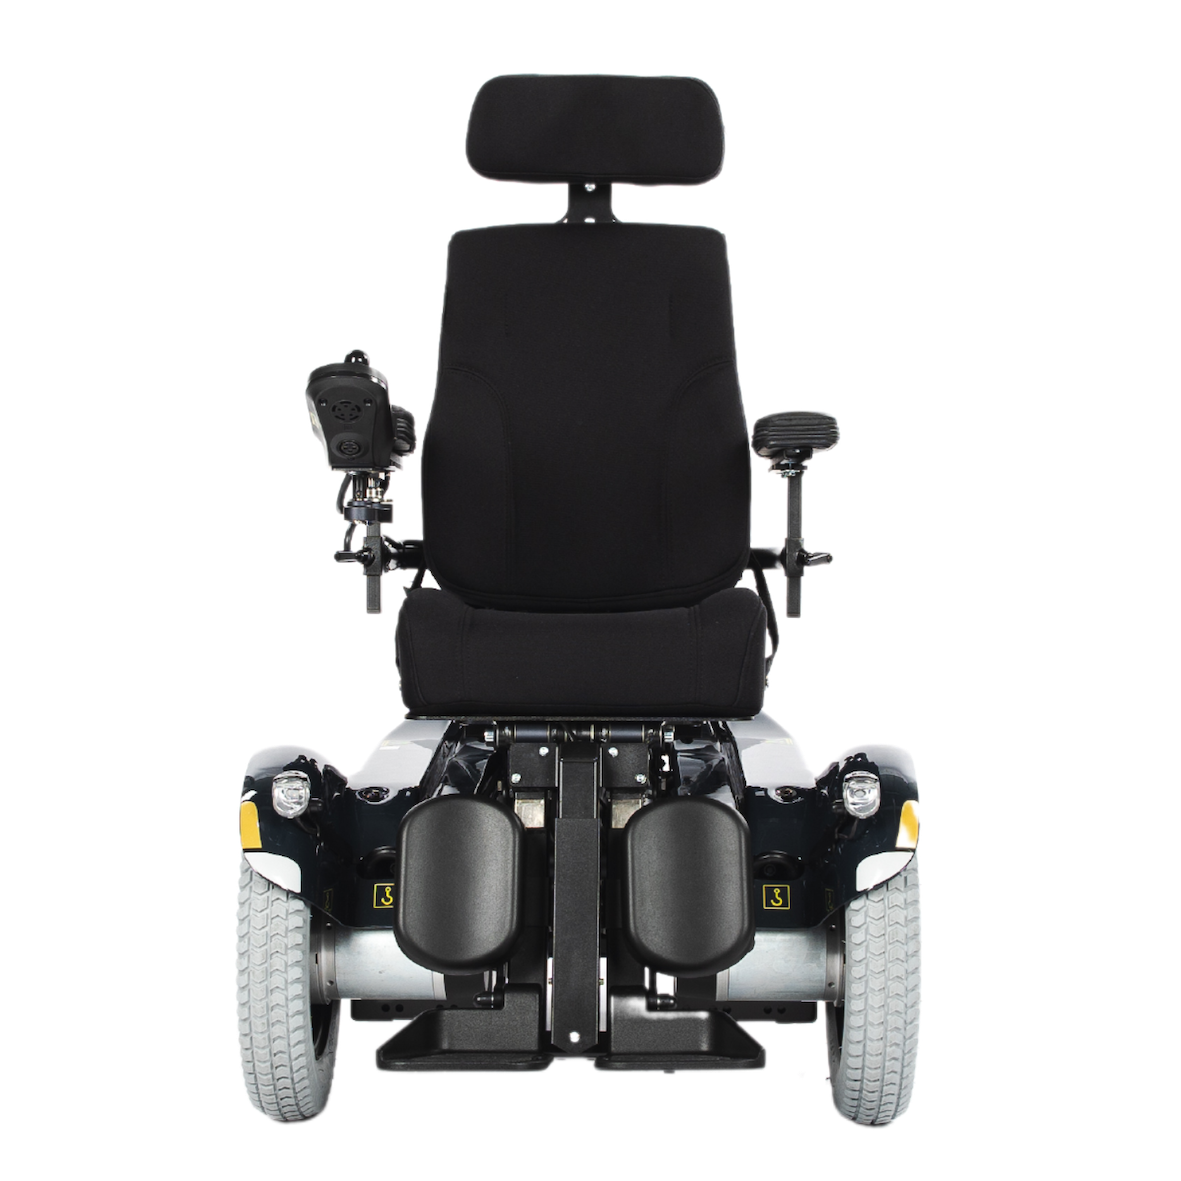 The front view of a a Balder Junior J335 childrens powerchair in a seated position.